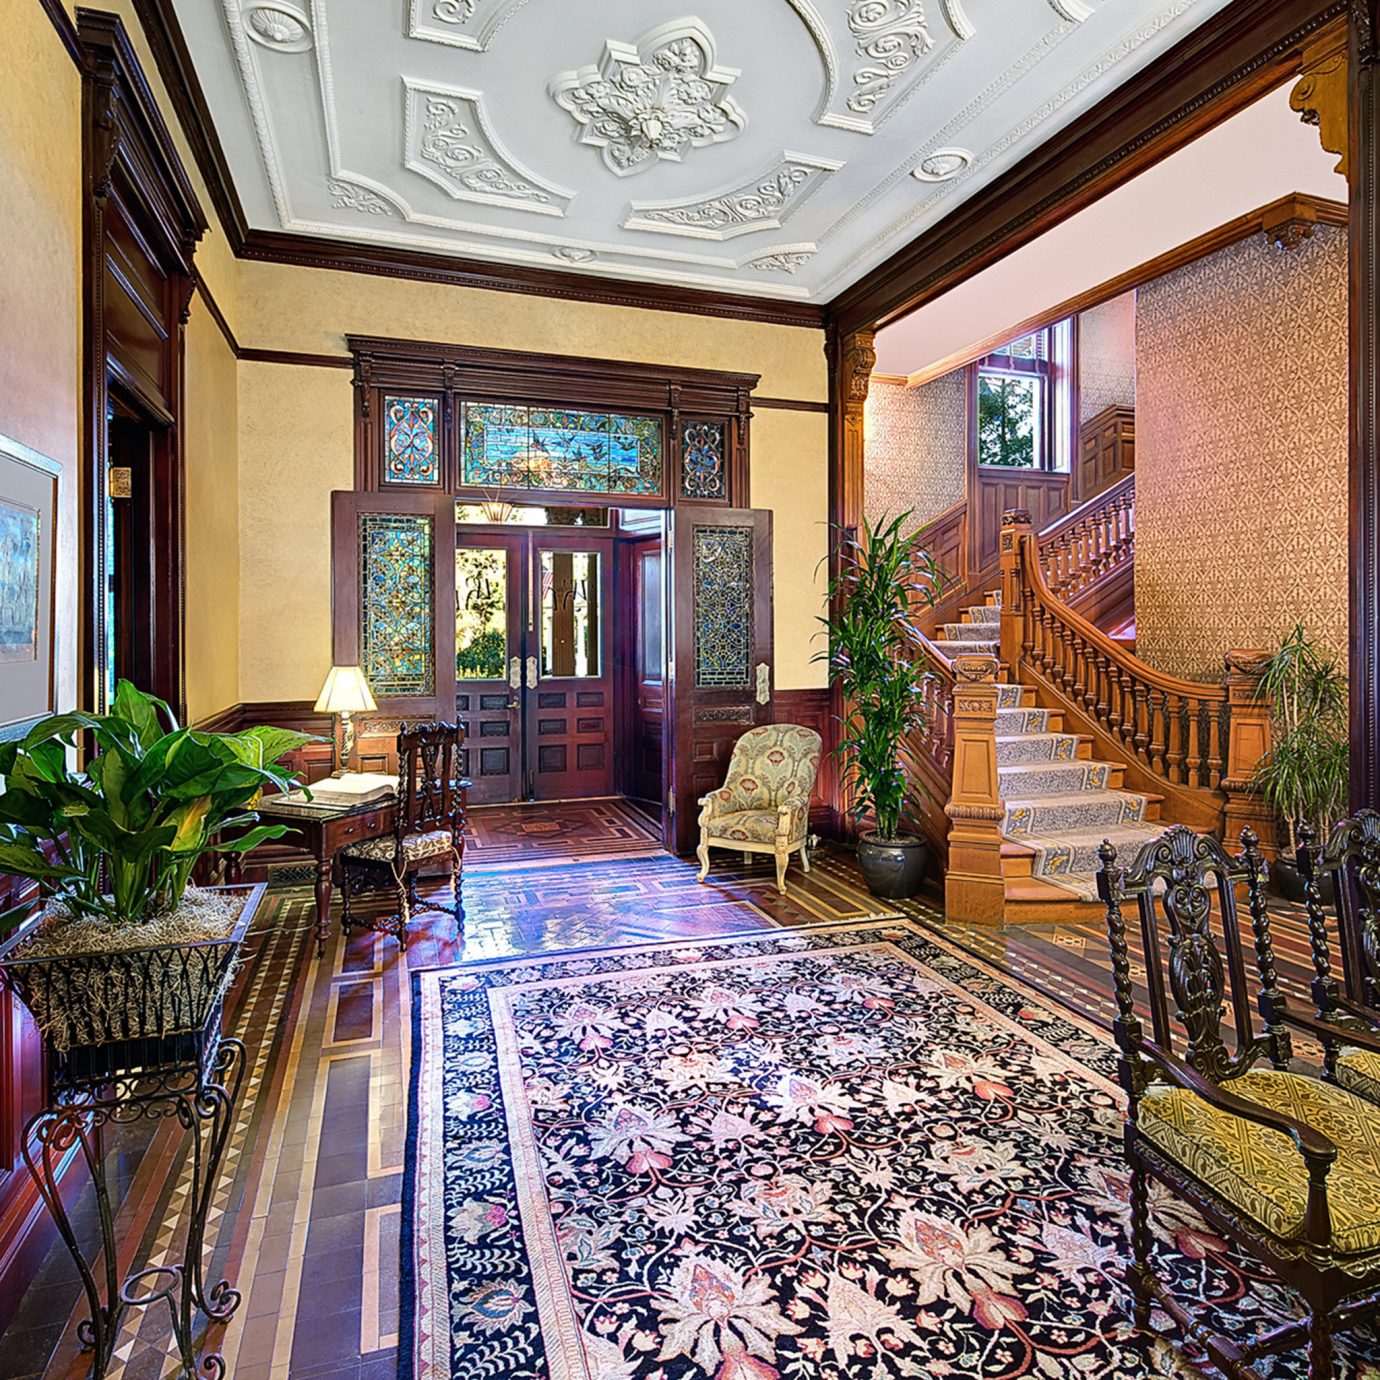 Historic Hotels Lounge Rustic Lobby property mansion home palace Resort